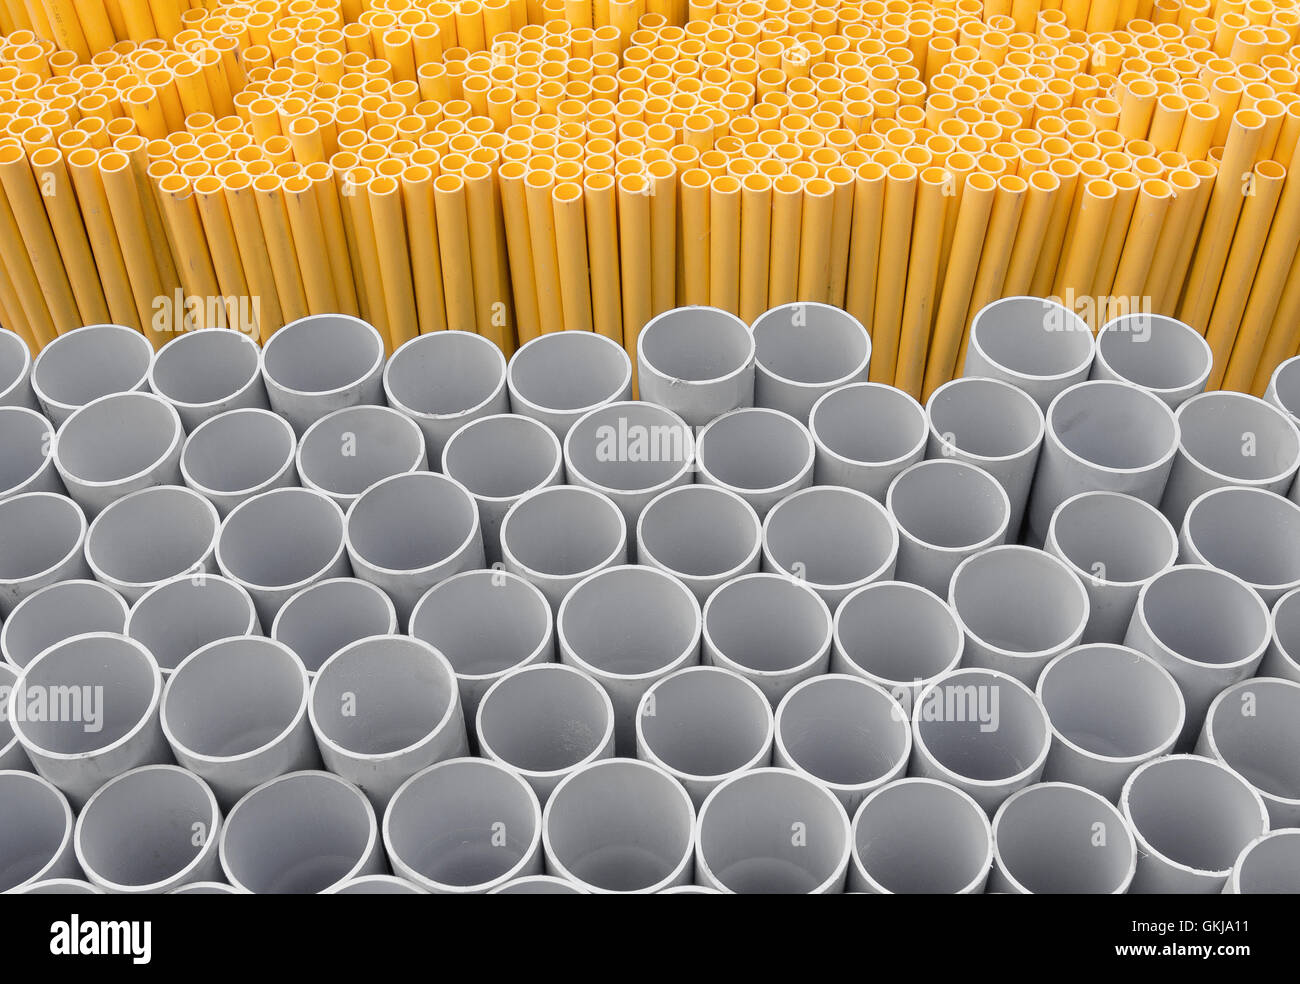 PVC pipes stacked in warehouse, Yellow pipe for electrical wiring and telephone cable conduit. Stock Photo